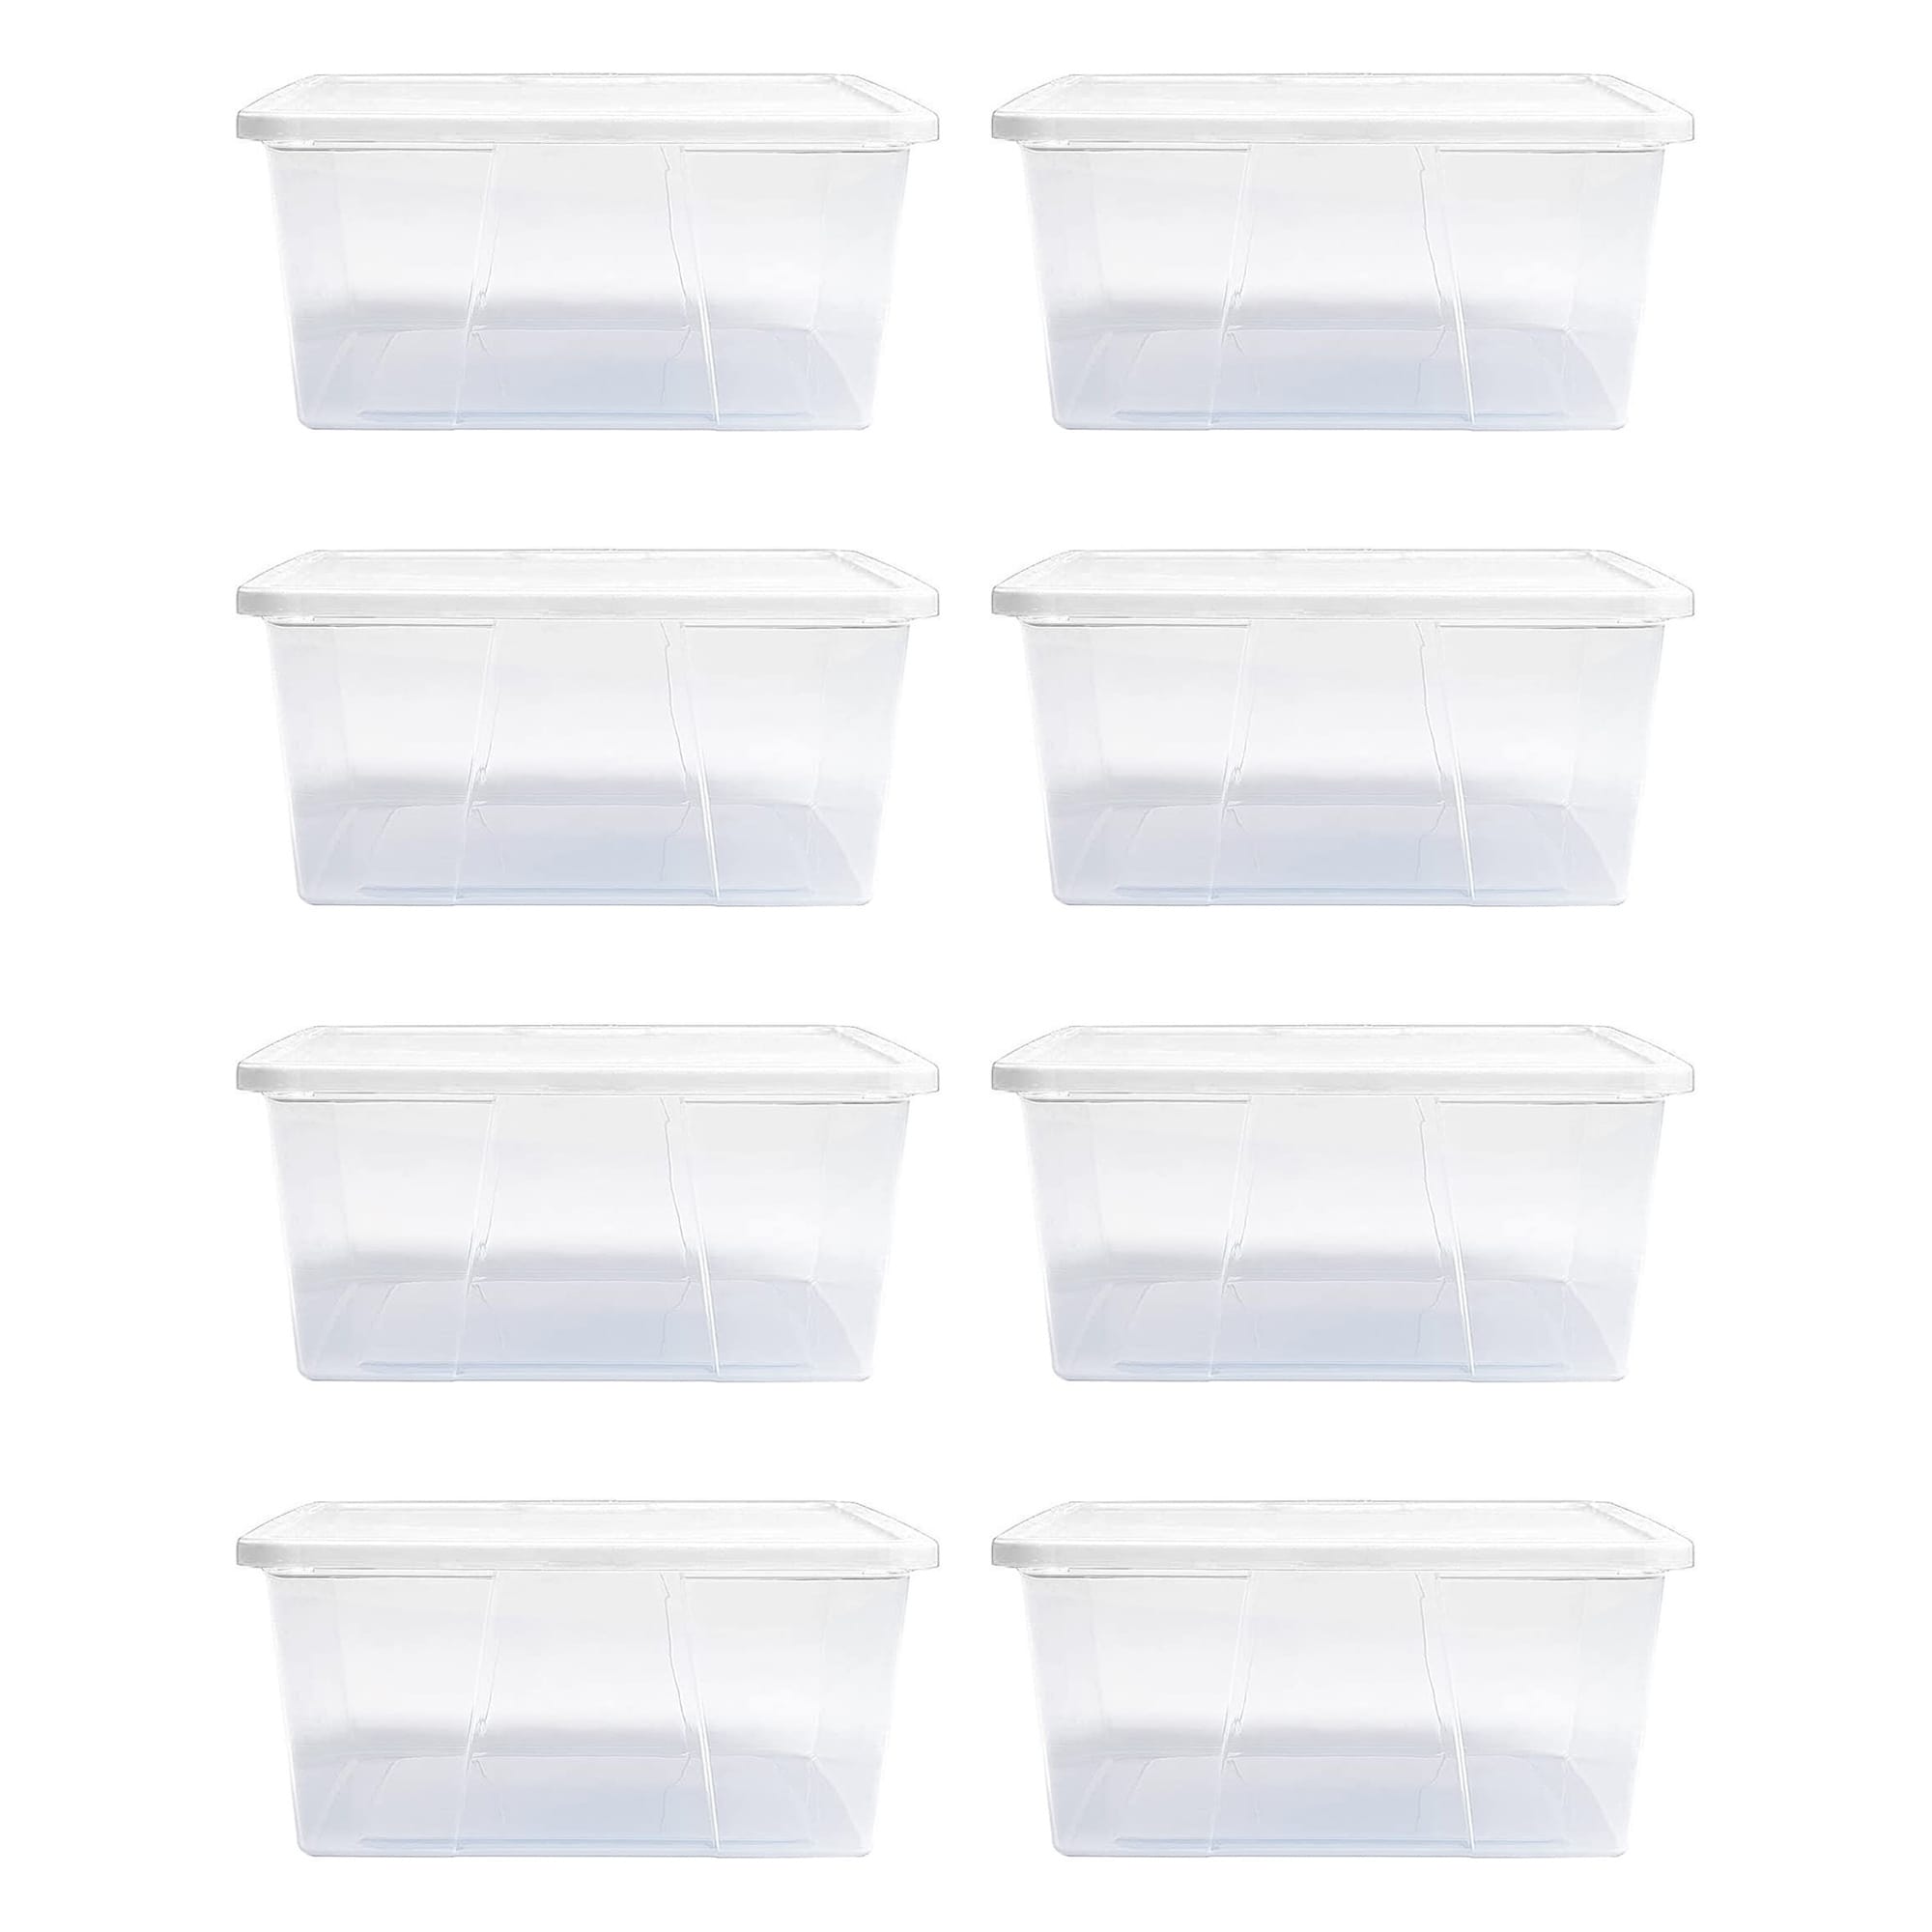 https://ak1.ostkcdn.com/images/products/is/images/direct/038dc3ffeab1bcc85e4513223bdc07c41267ee92/Homz-12-Qt-Snaplock-Clear-Plastic-Storage-Container-Bin-with-Secure-Lid-%288-Pack%29.jpg